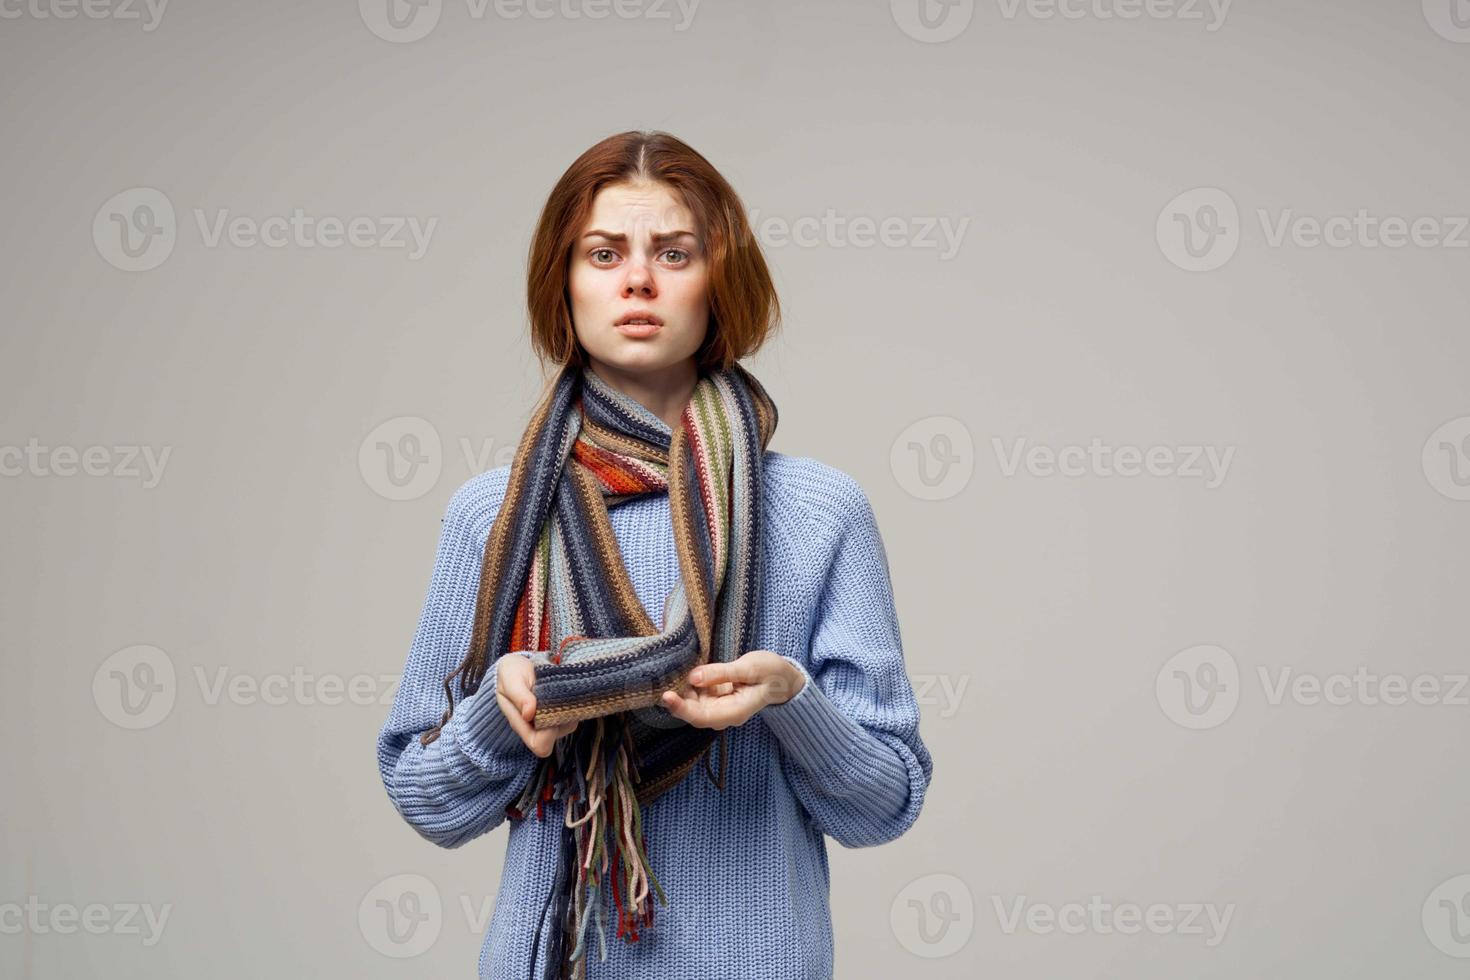 woman neck scarf cold handkerchief isolated background photo